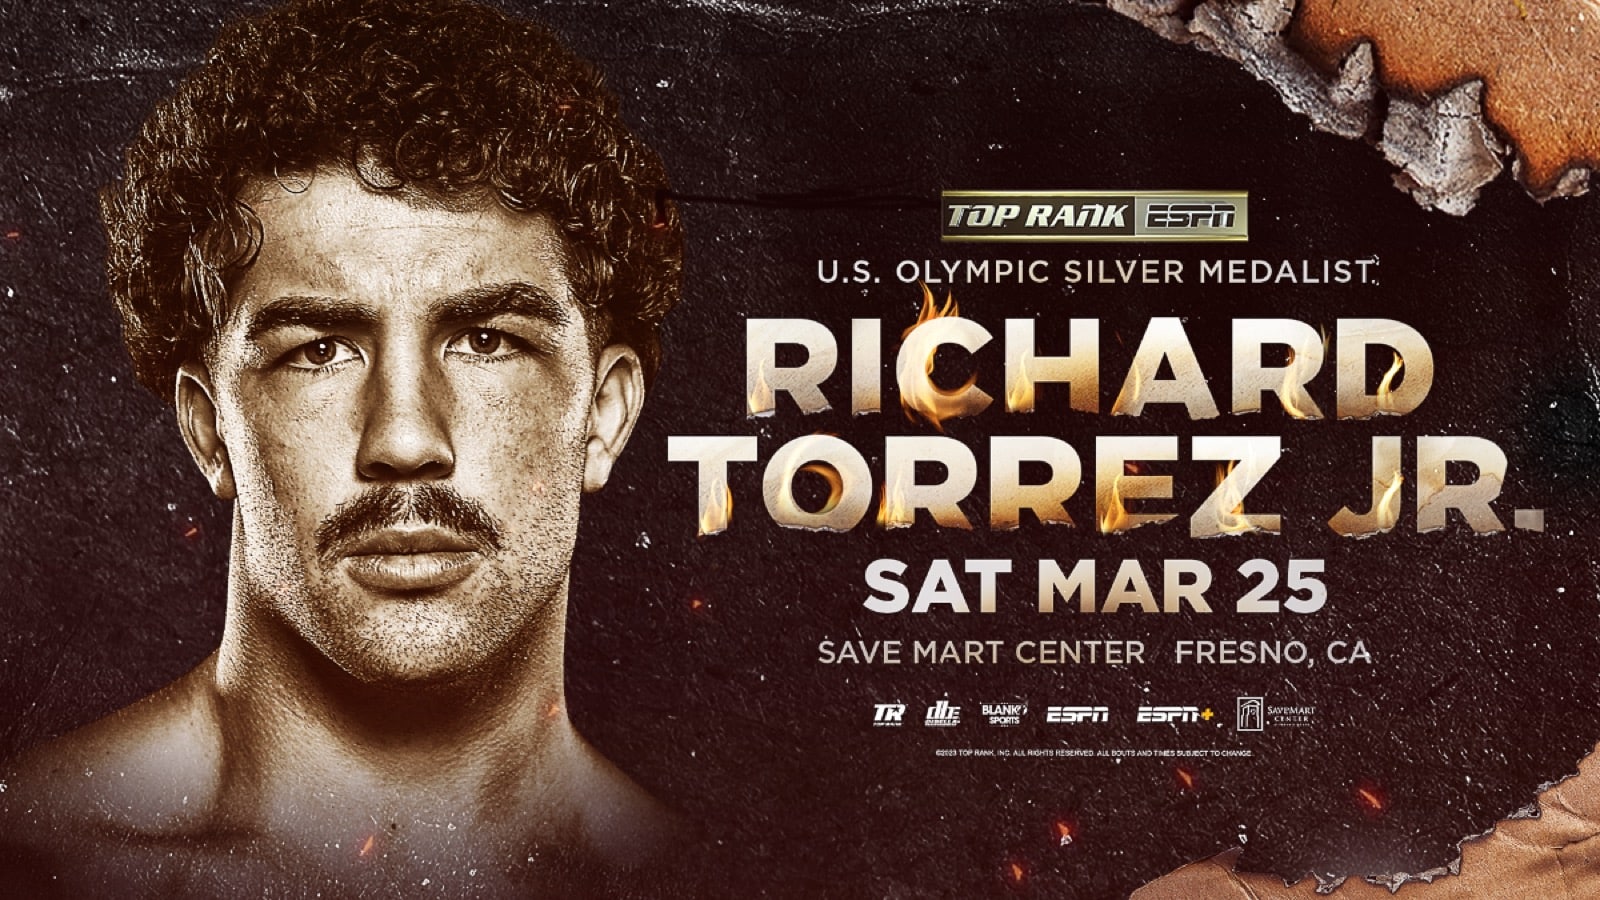 Richard Torrez Jr. Looks to Continue Knockout Streak against Willie Jake Jr. on March 25 - Boxing Image